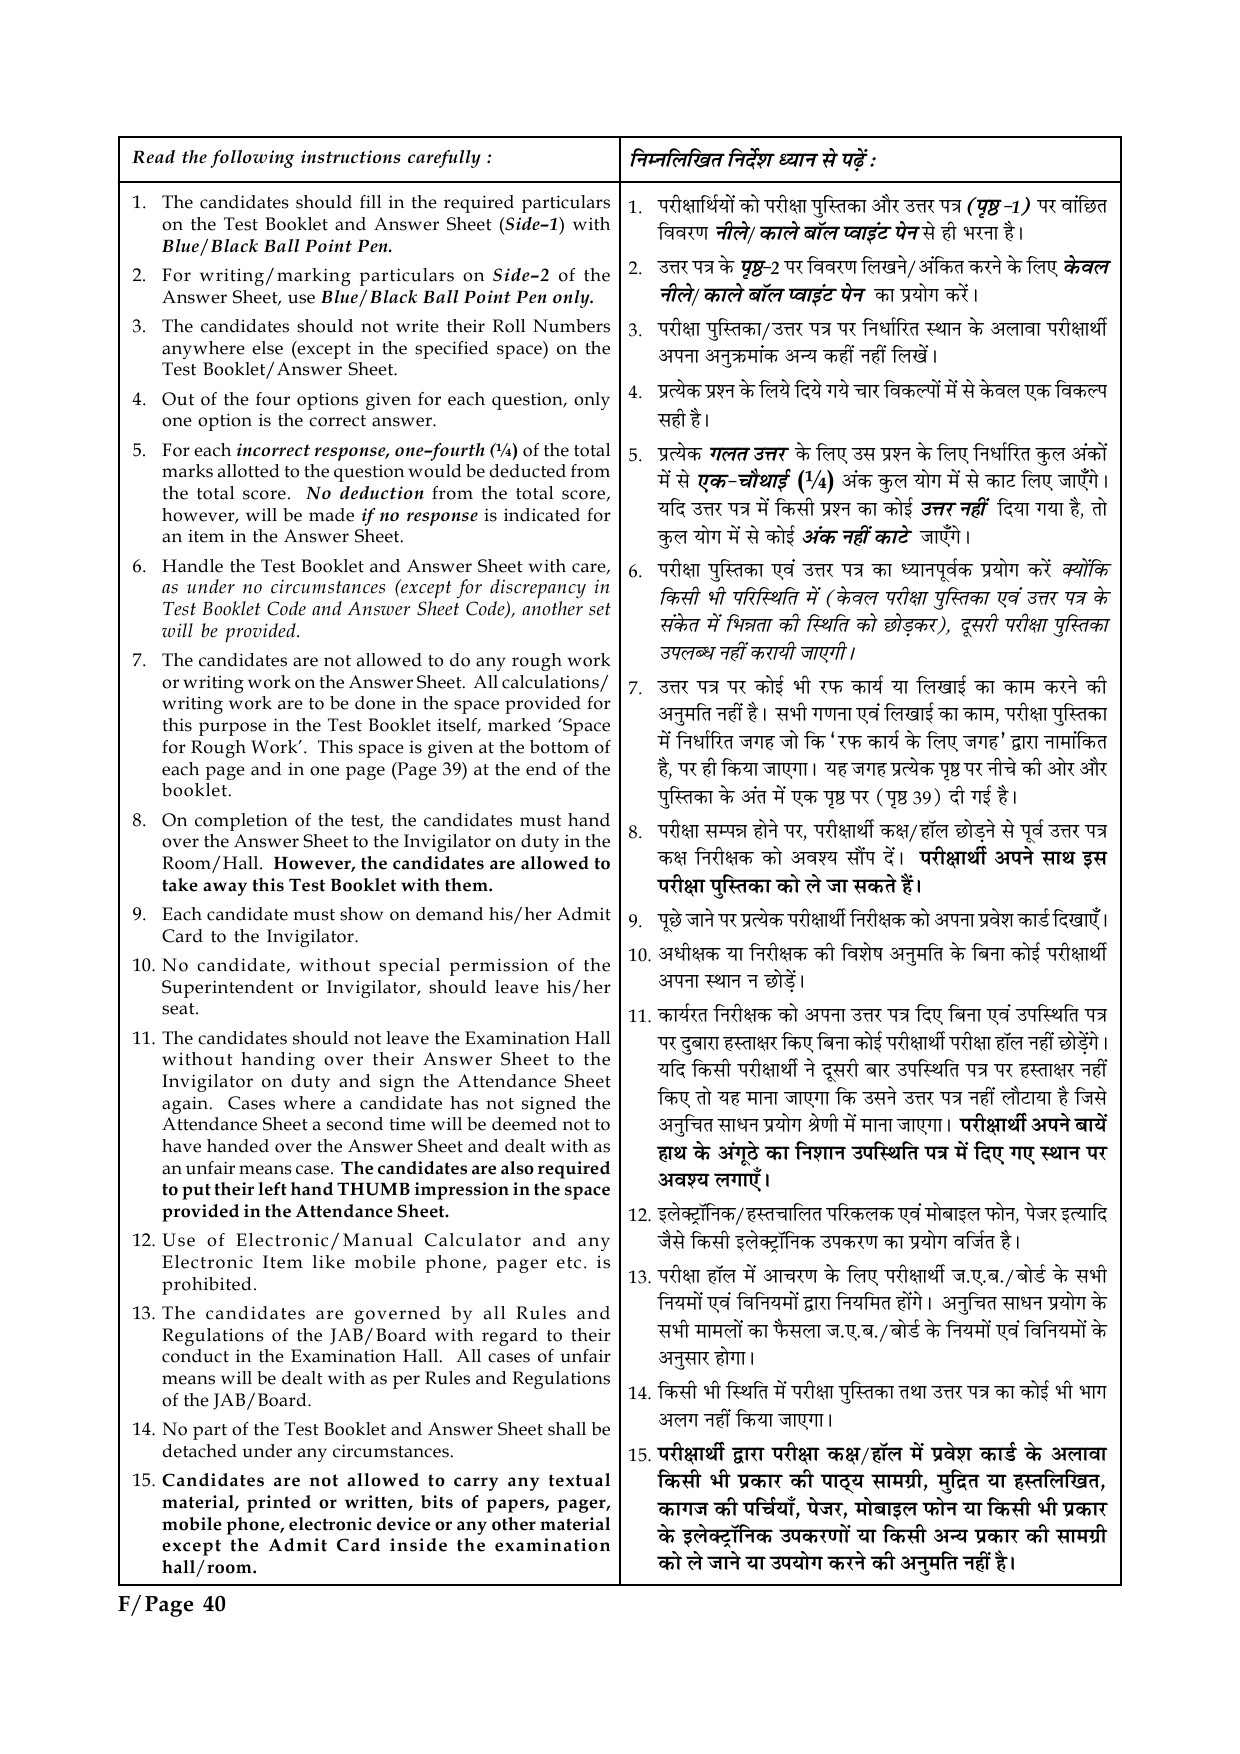 JEE Main Exam Question Paper 2014 Booklet F 39